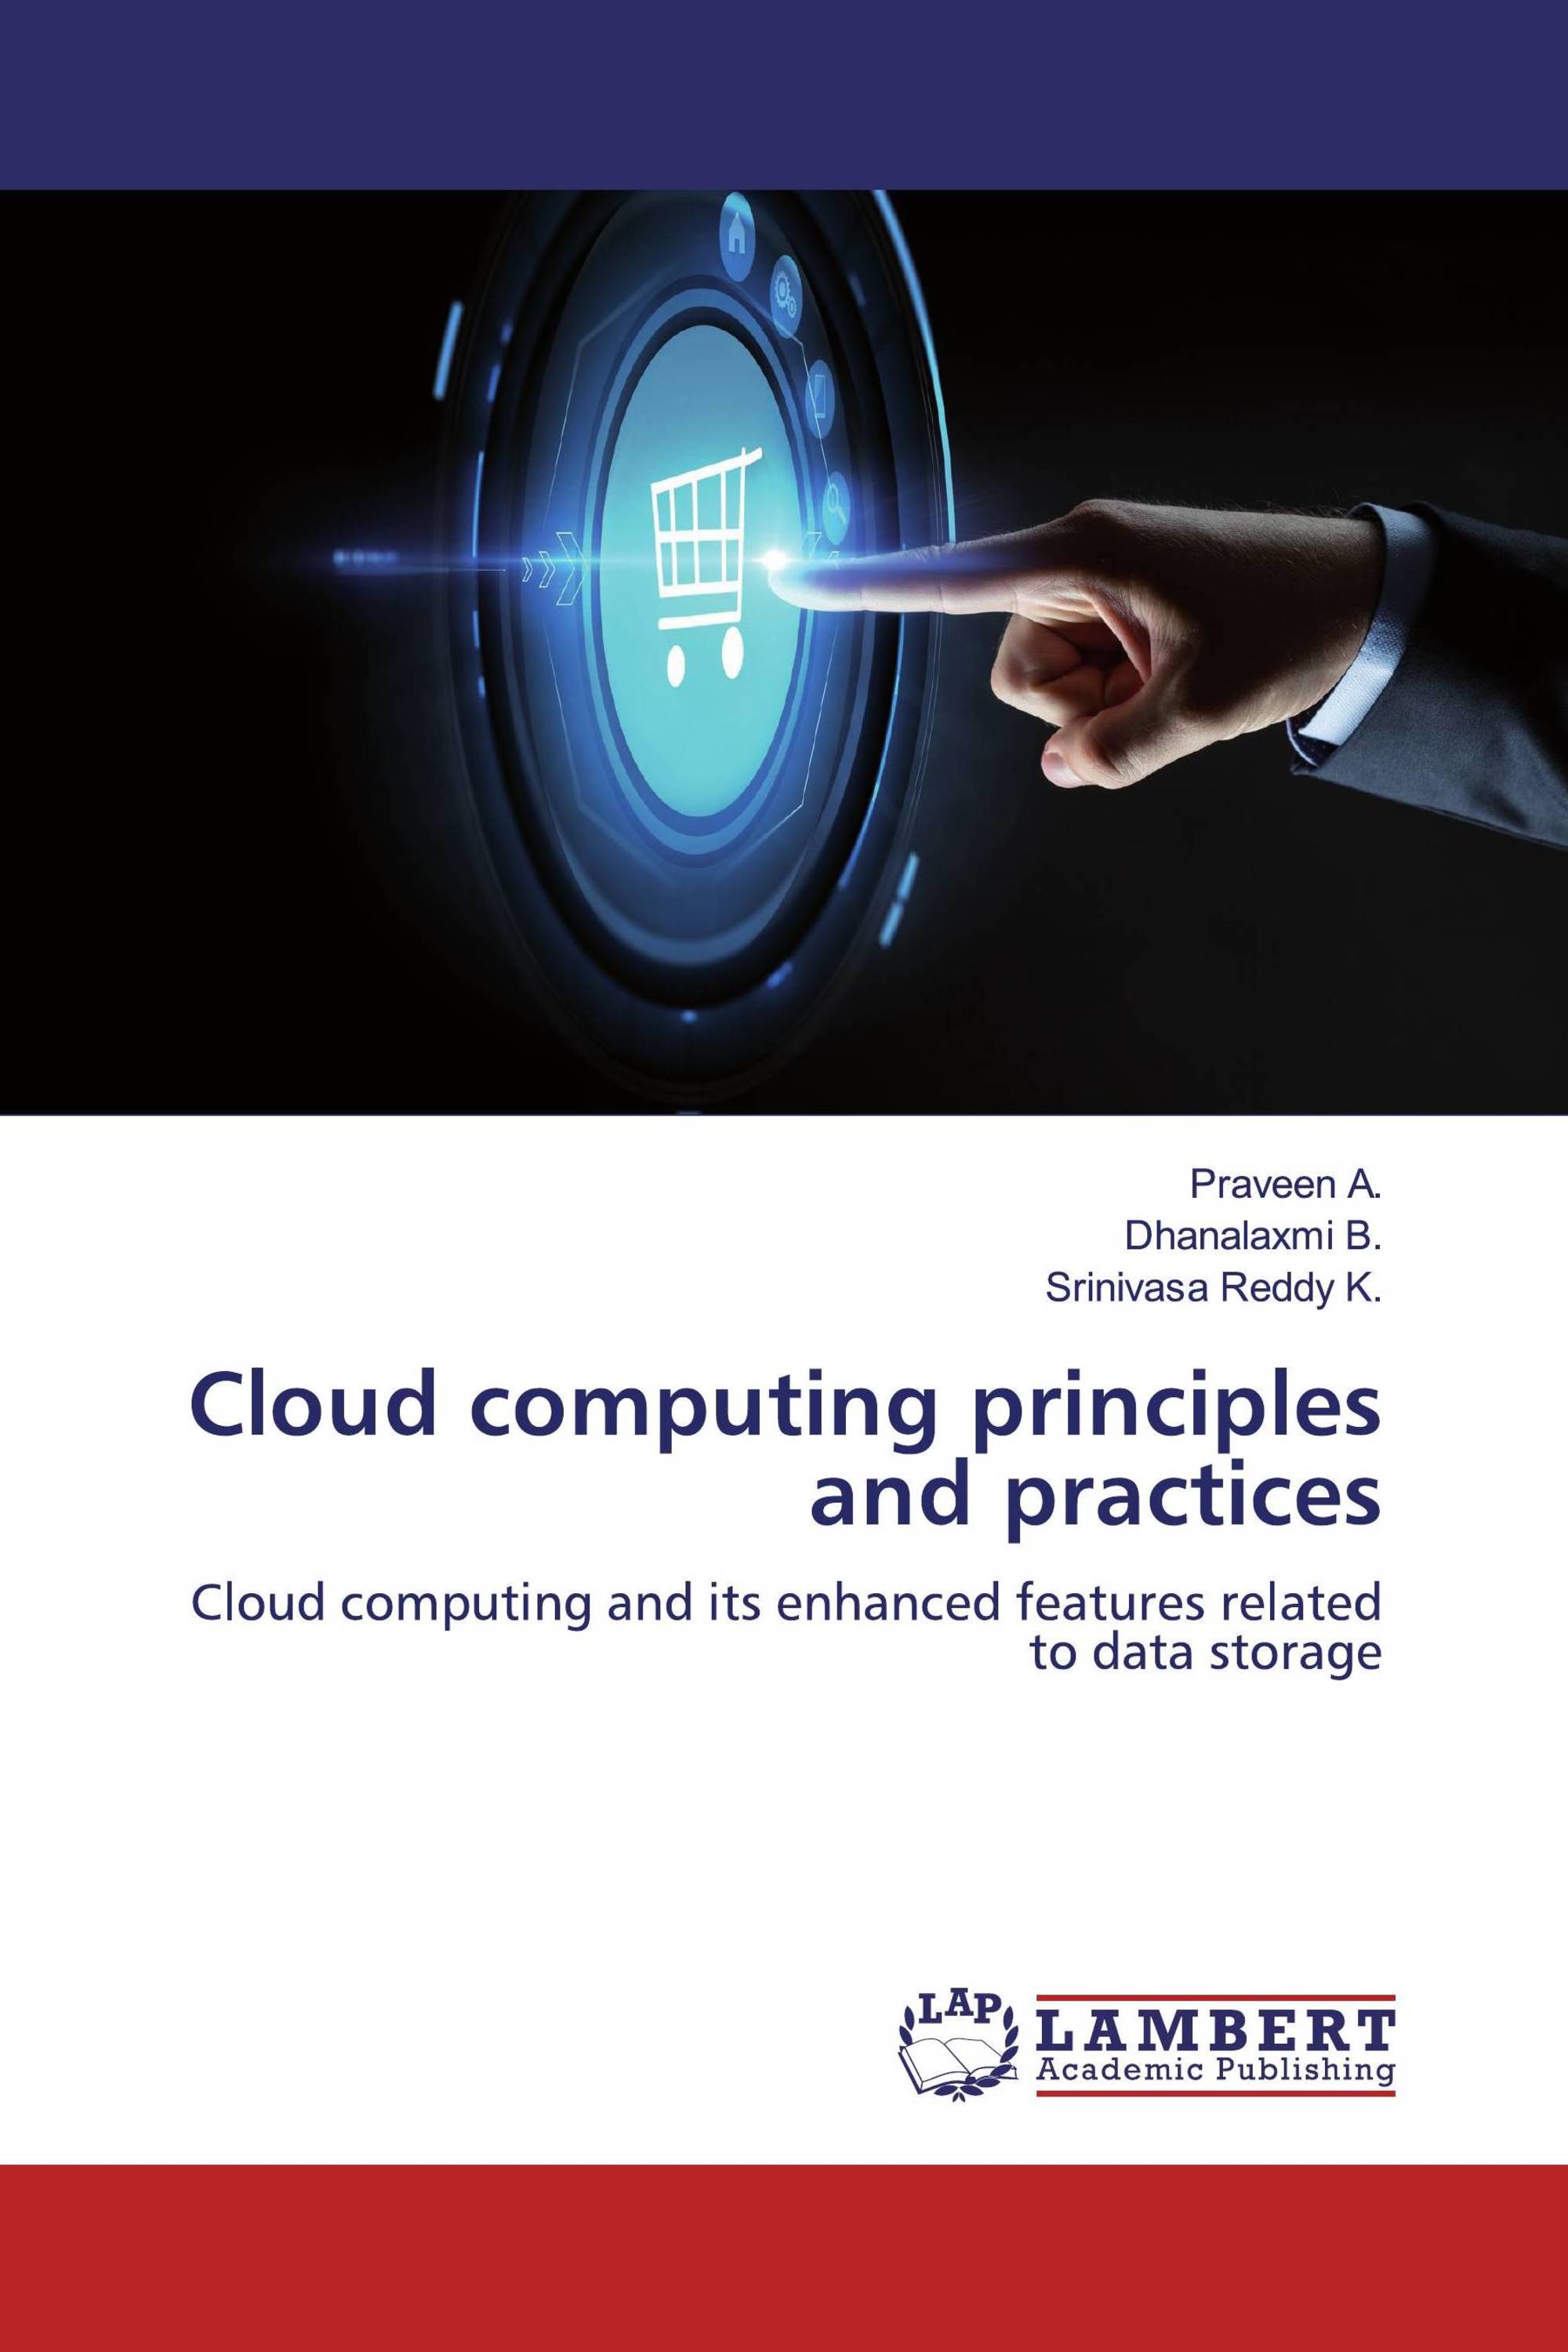 Cloud computing principles and practices